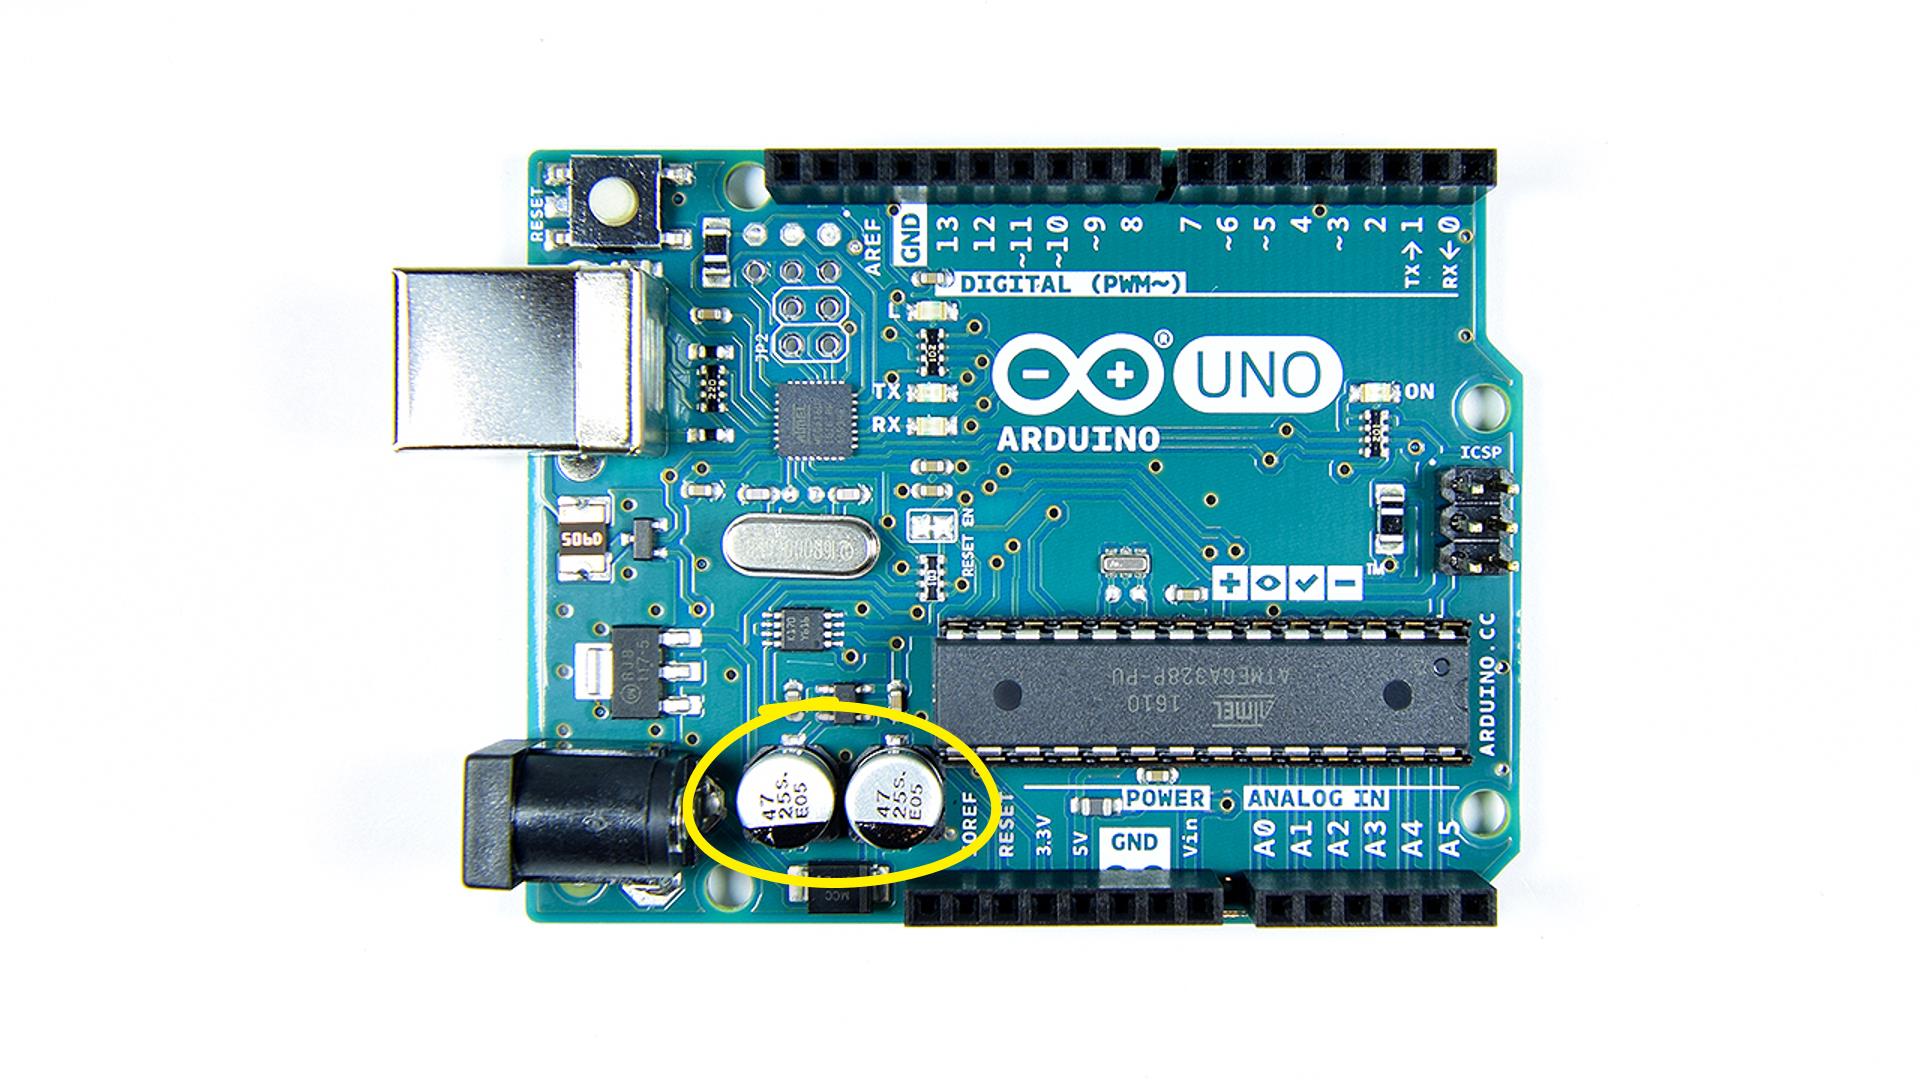 An In Depth Look At The Arduino Uno PCB